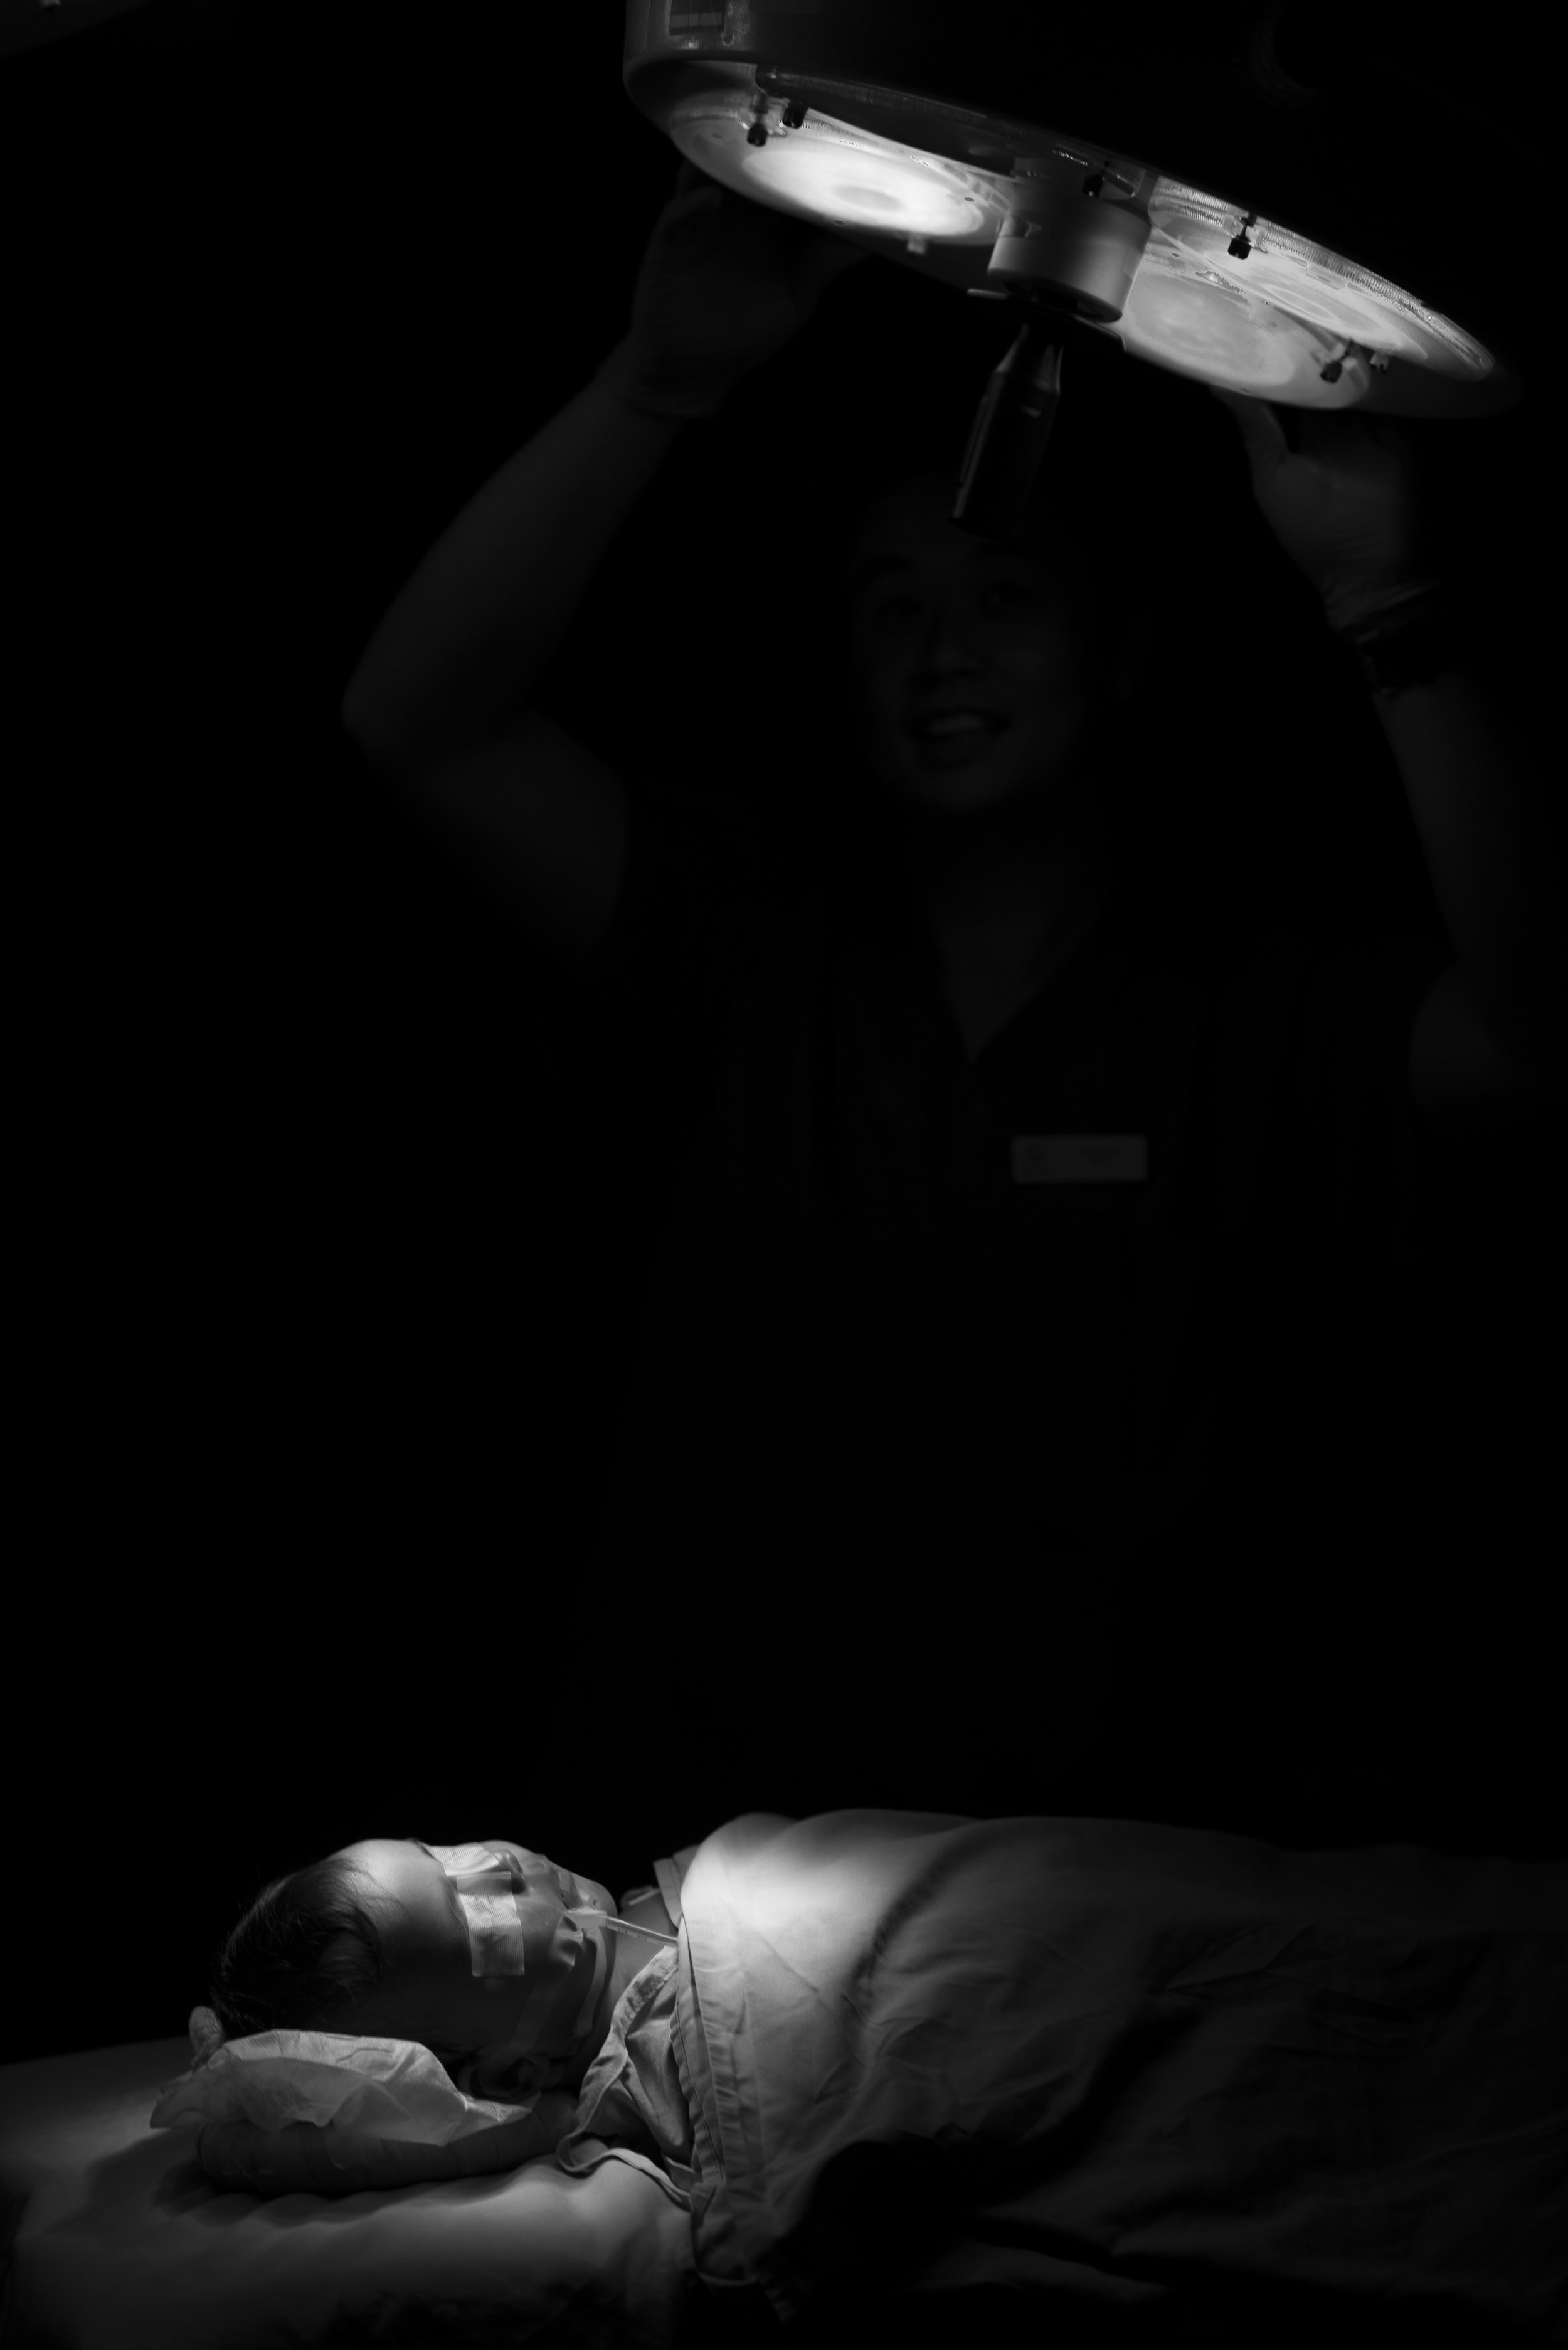  Tonga.  A young boy lies asleep in the dark waiting for surgery, whilst the team prepares out of frame. In this moment, the only sound is that of his heartbeat on the monitor. The 'stage' of a theatre is one I've become familar over the years, but I